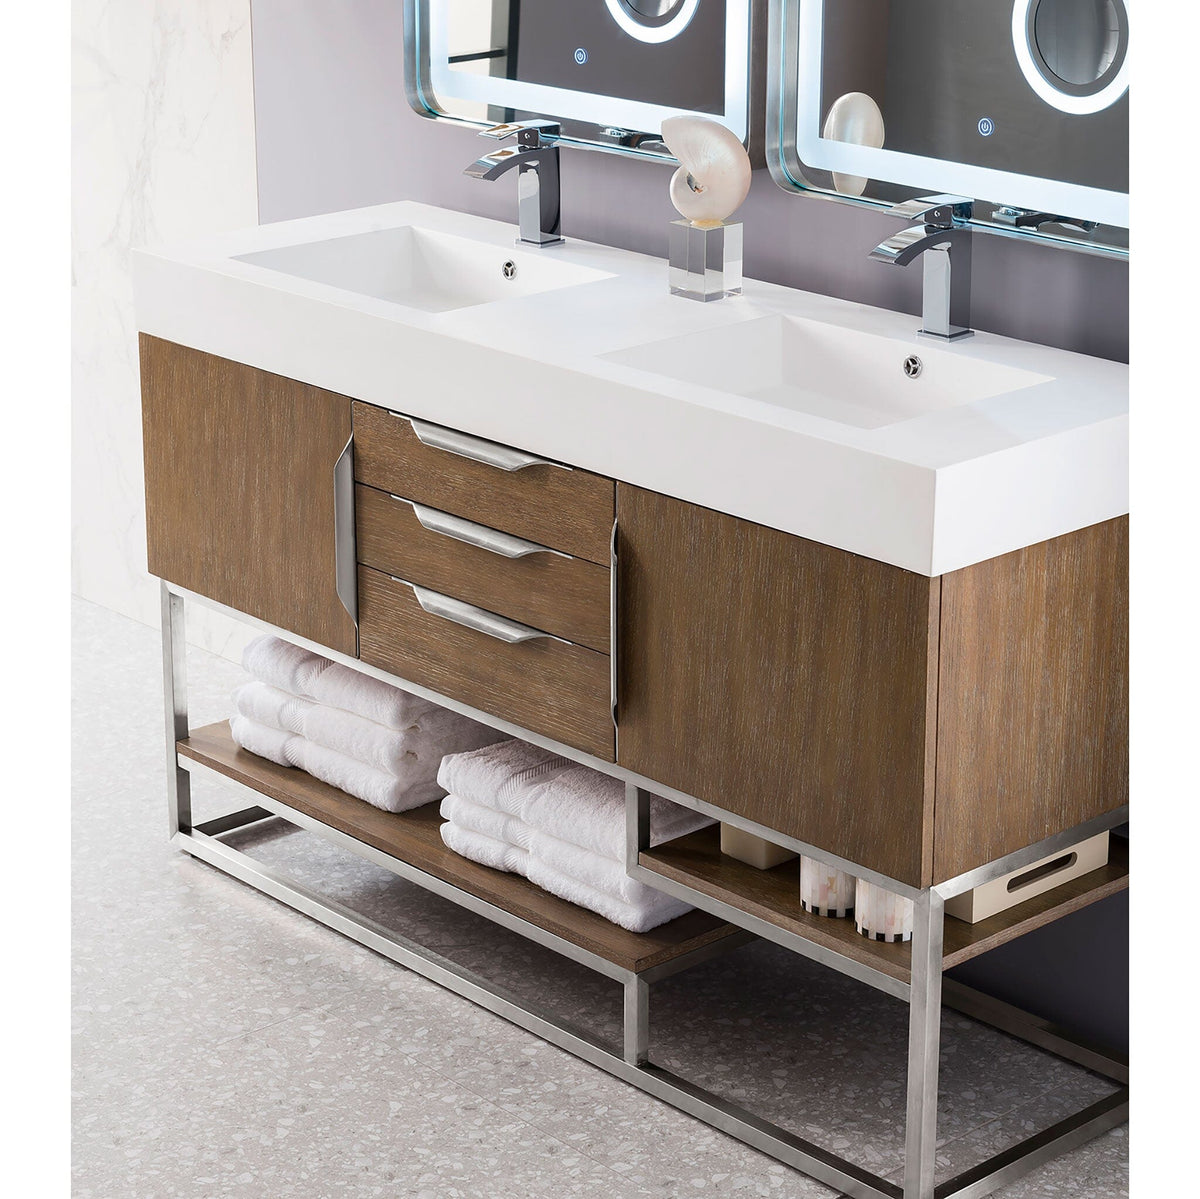 59" Columbia Double Bathroom Vanity, Latte Oak w/ Brushed Nickel Base and Glossy White Composite Stone Top